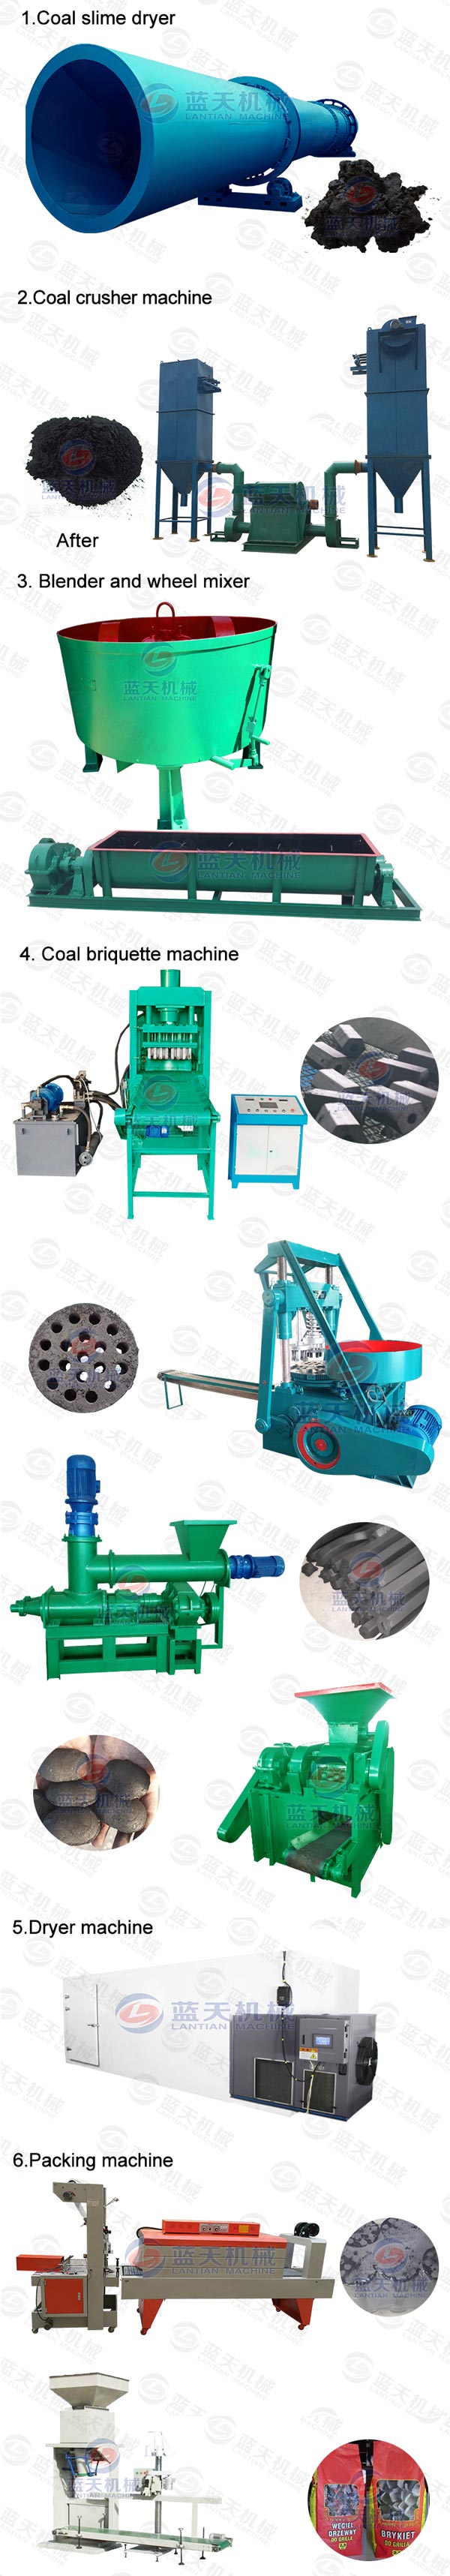 Product Line of Coal Slime Dryer